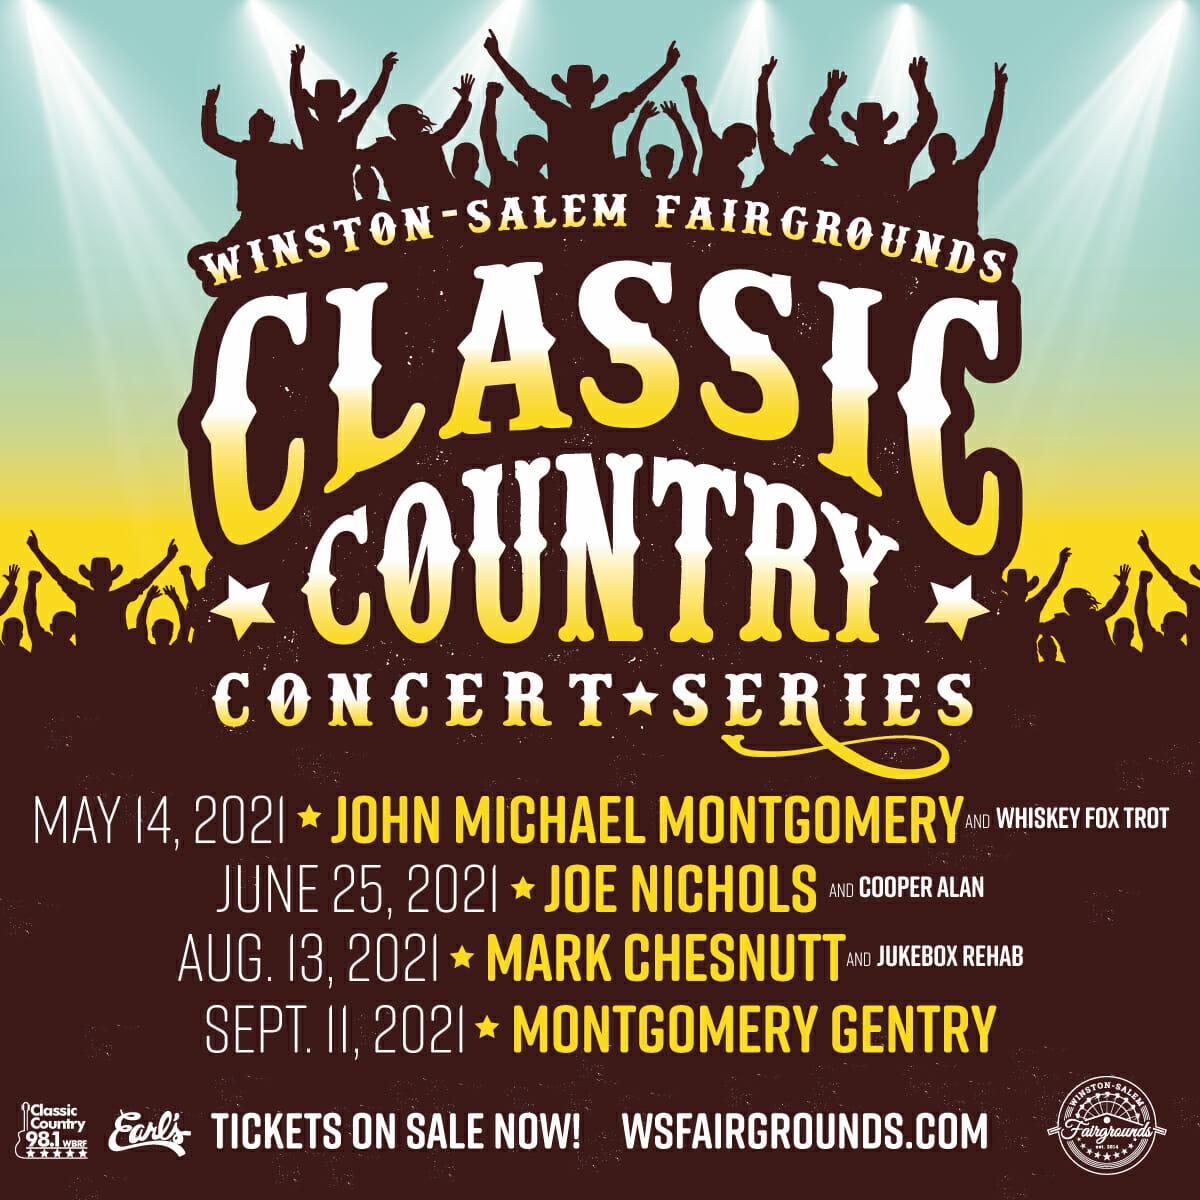 Classic Country Concert Series in partnership with 98.1 WBRF Winston